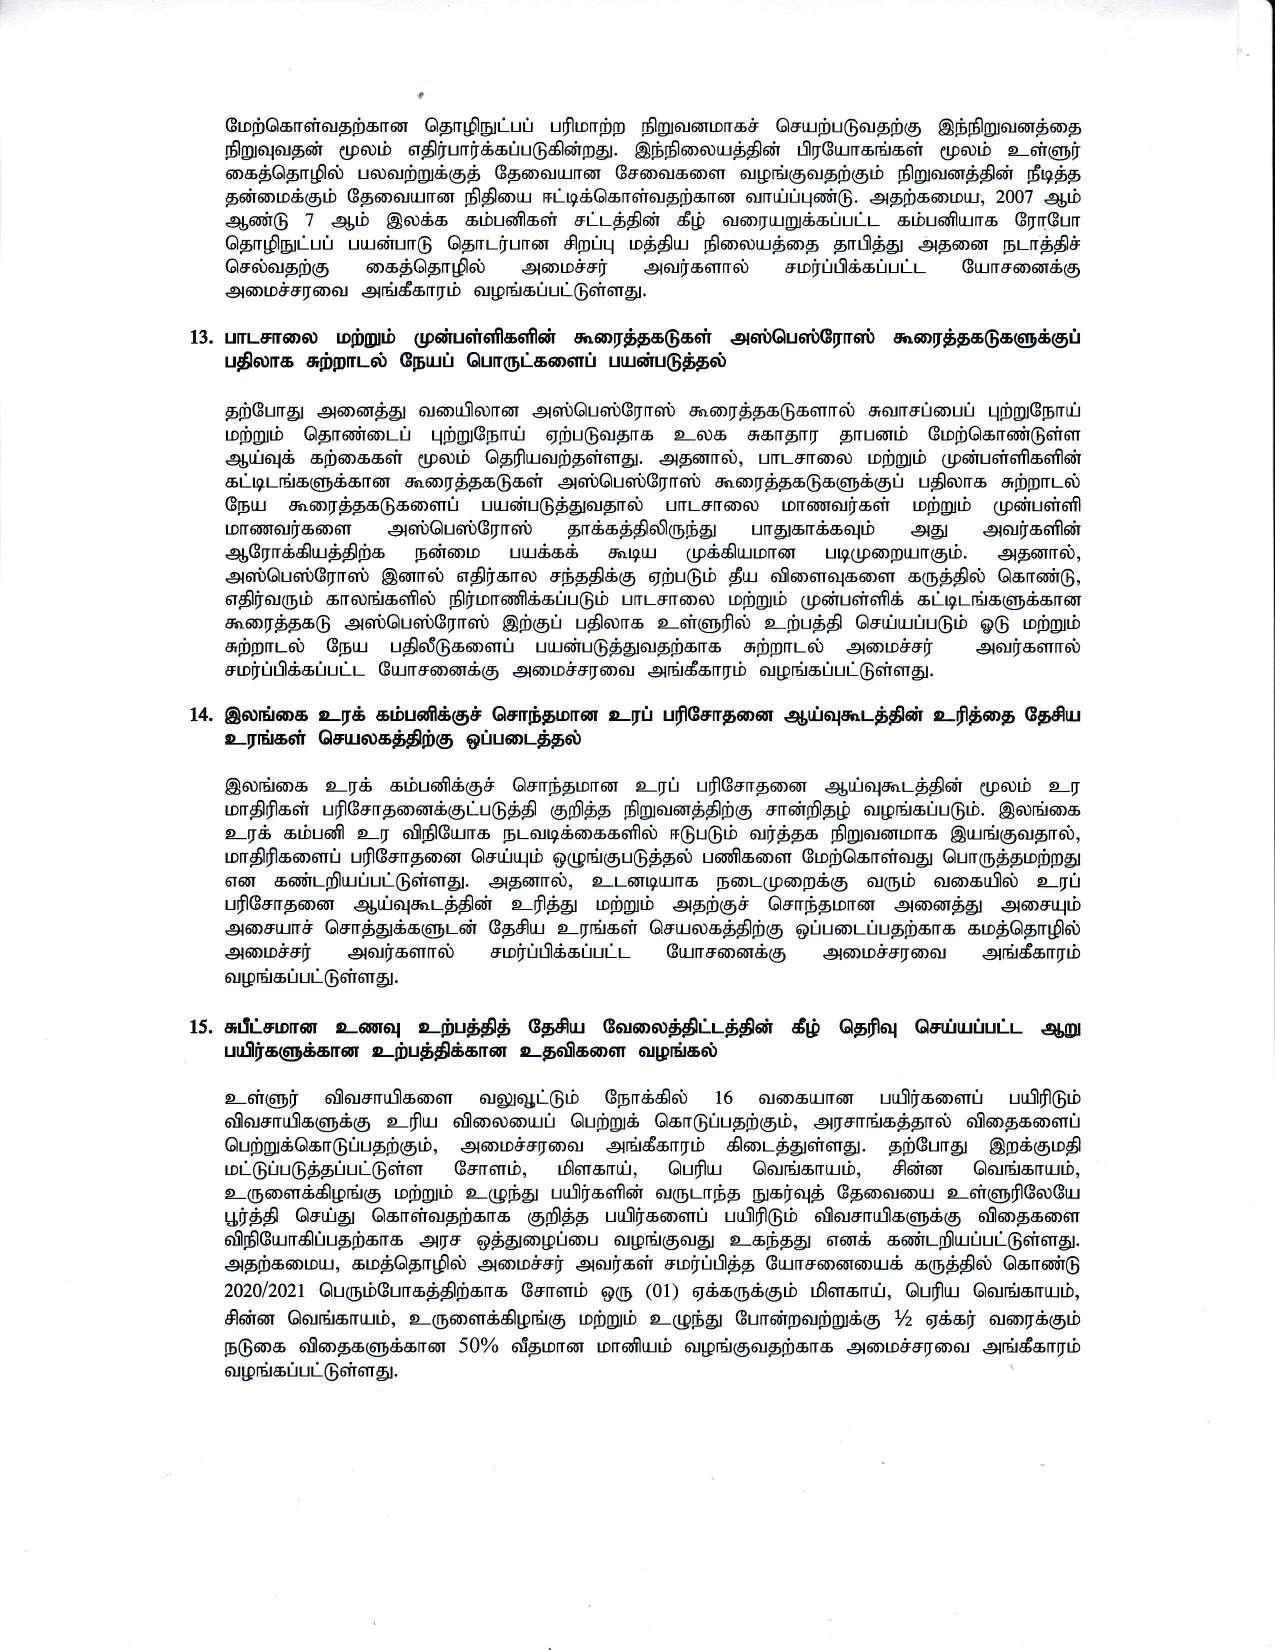 Cabinet Desion on 16.11.2020 Tamil page 005